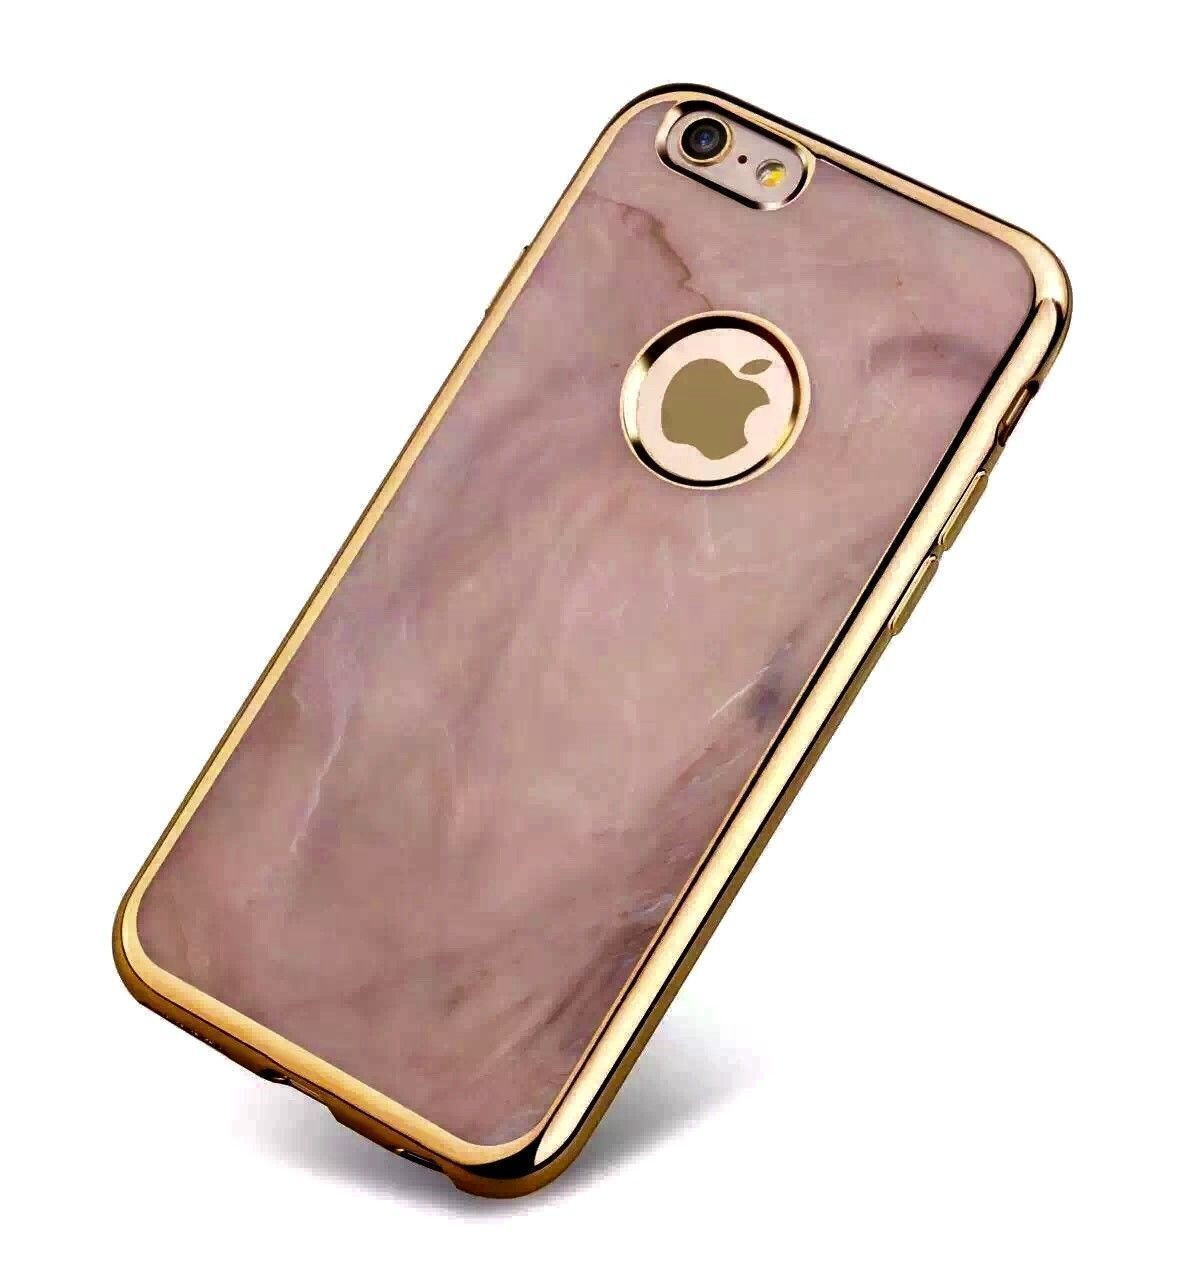 $7,300 iPhone 6 Is 24K Gold Plated and Features a Diamond Apple Logo